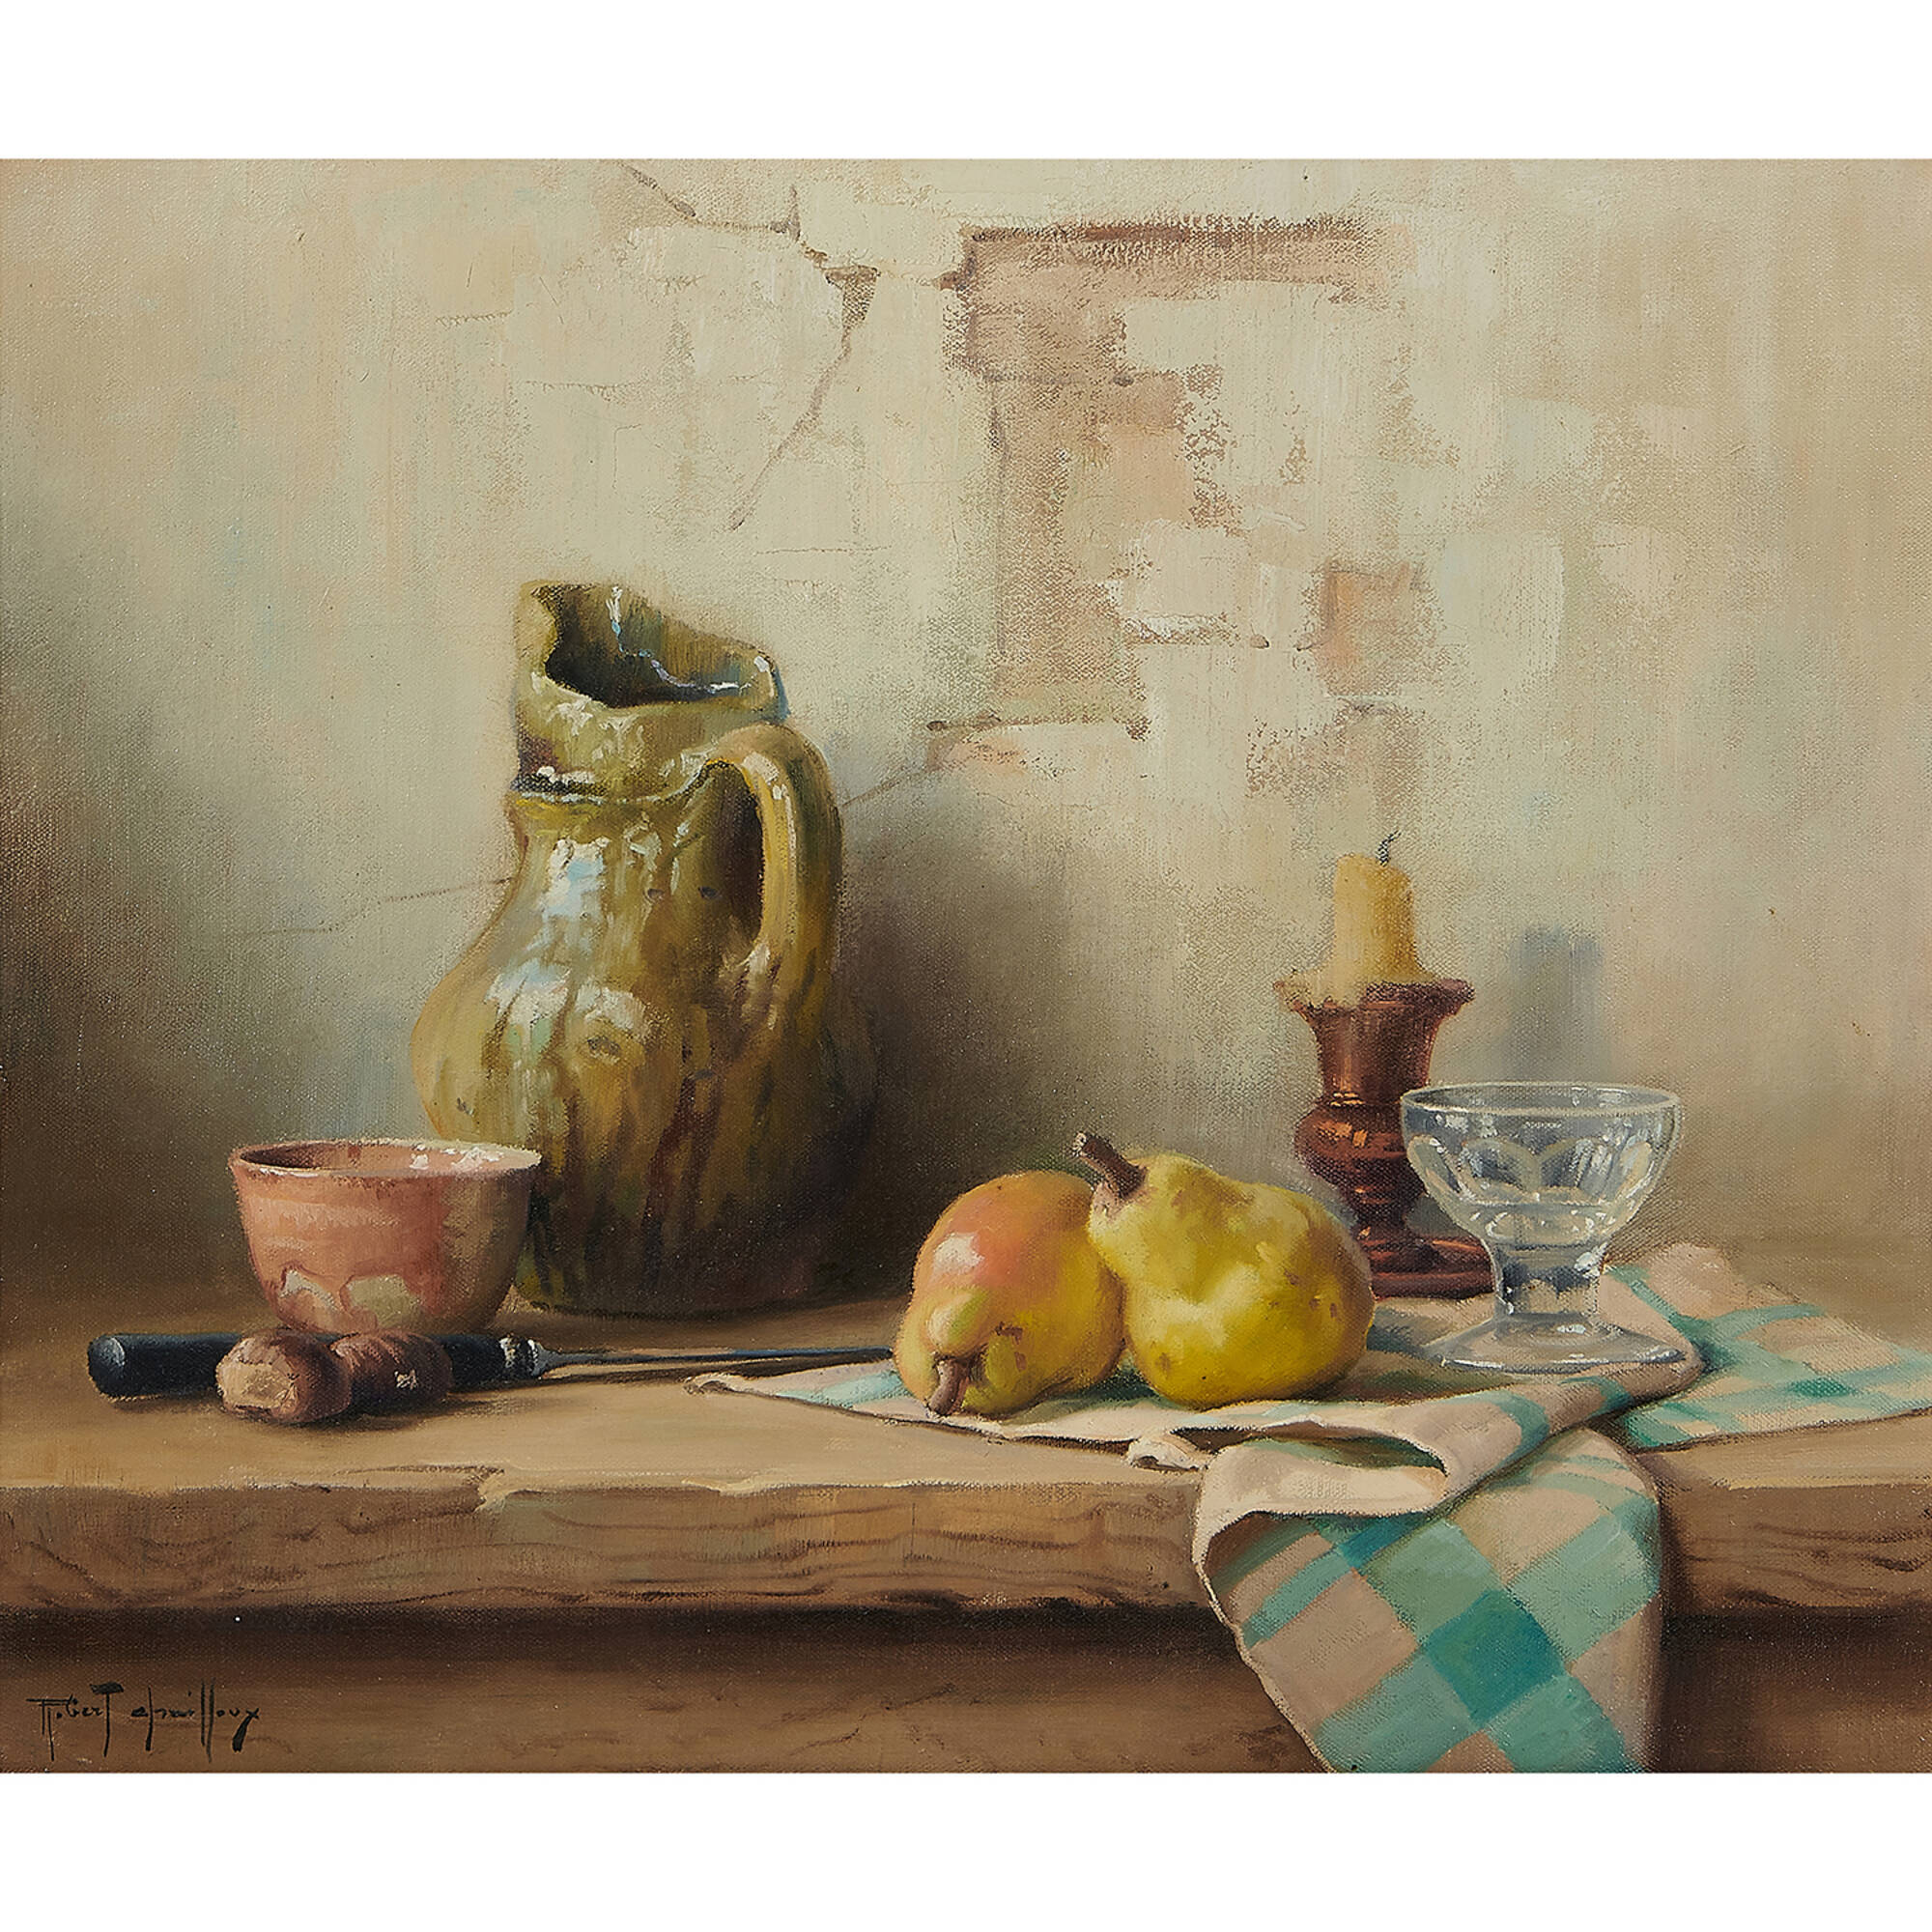 548: ROBERT CHAILLOUX, Still Life with Chestnuts, Knife, Bowl, Pitcher ...